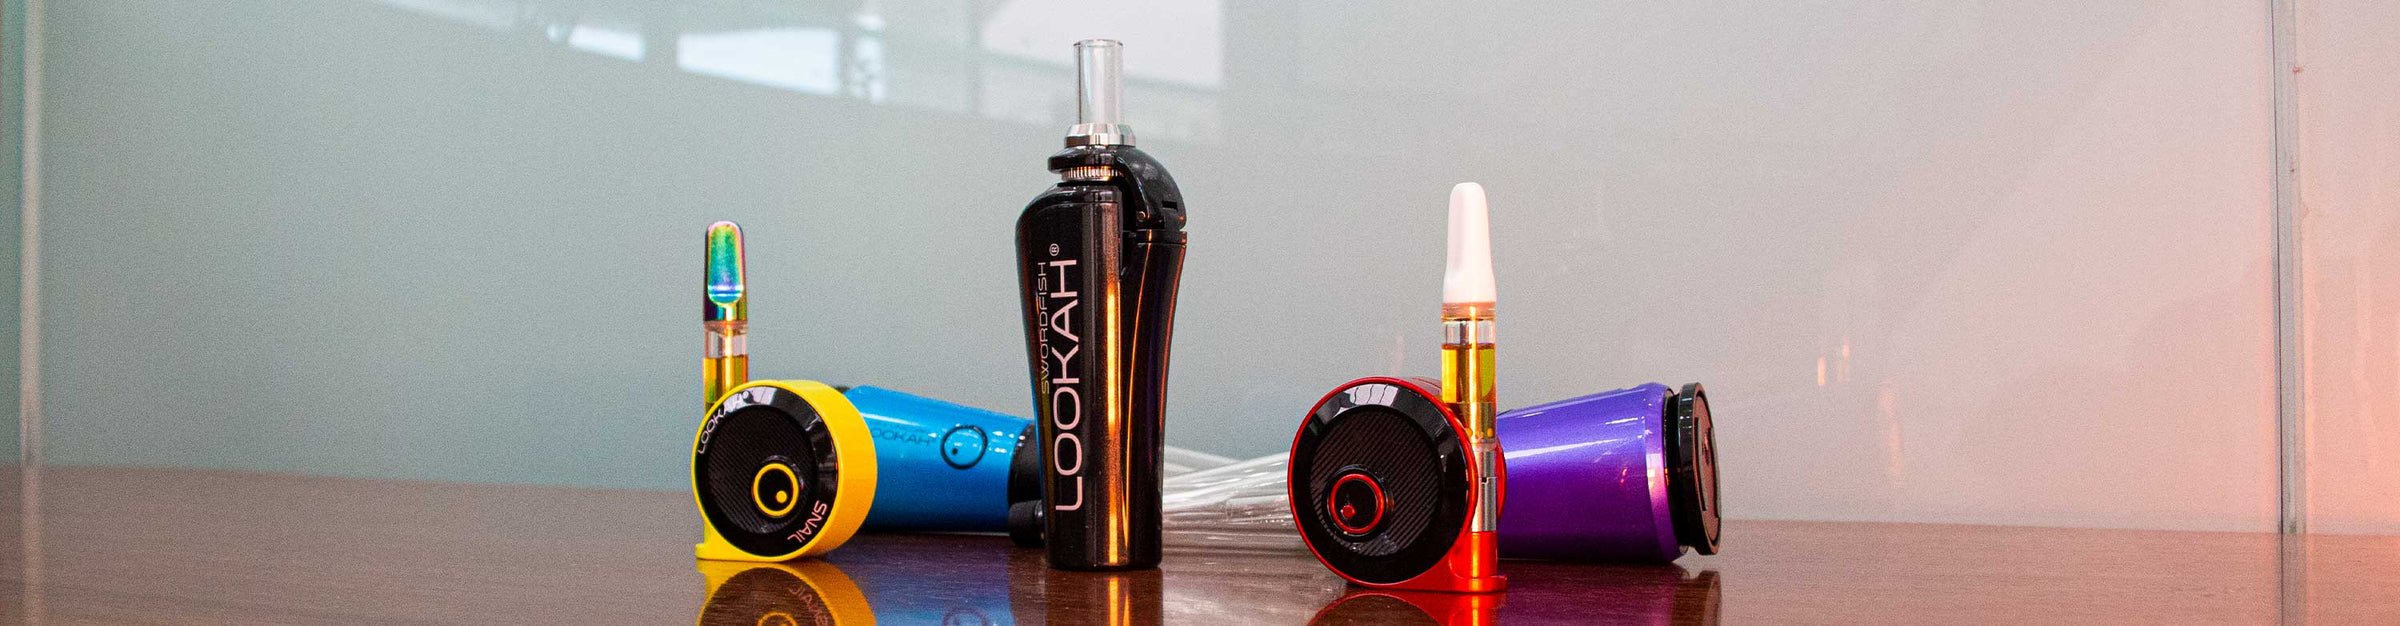 Lookah Products standing on table in office lobby 